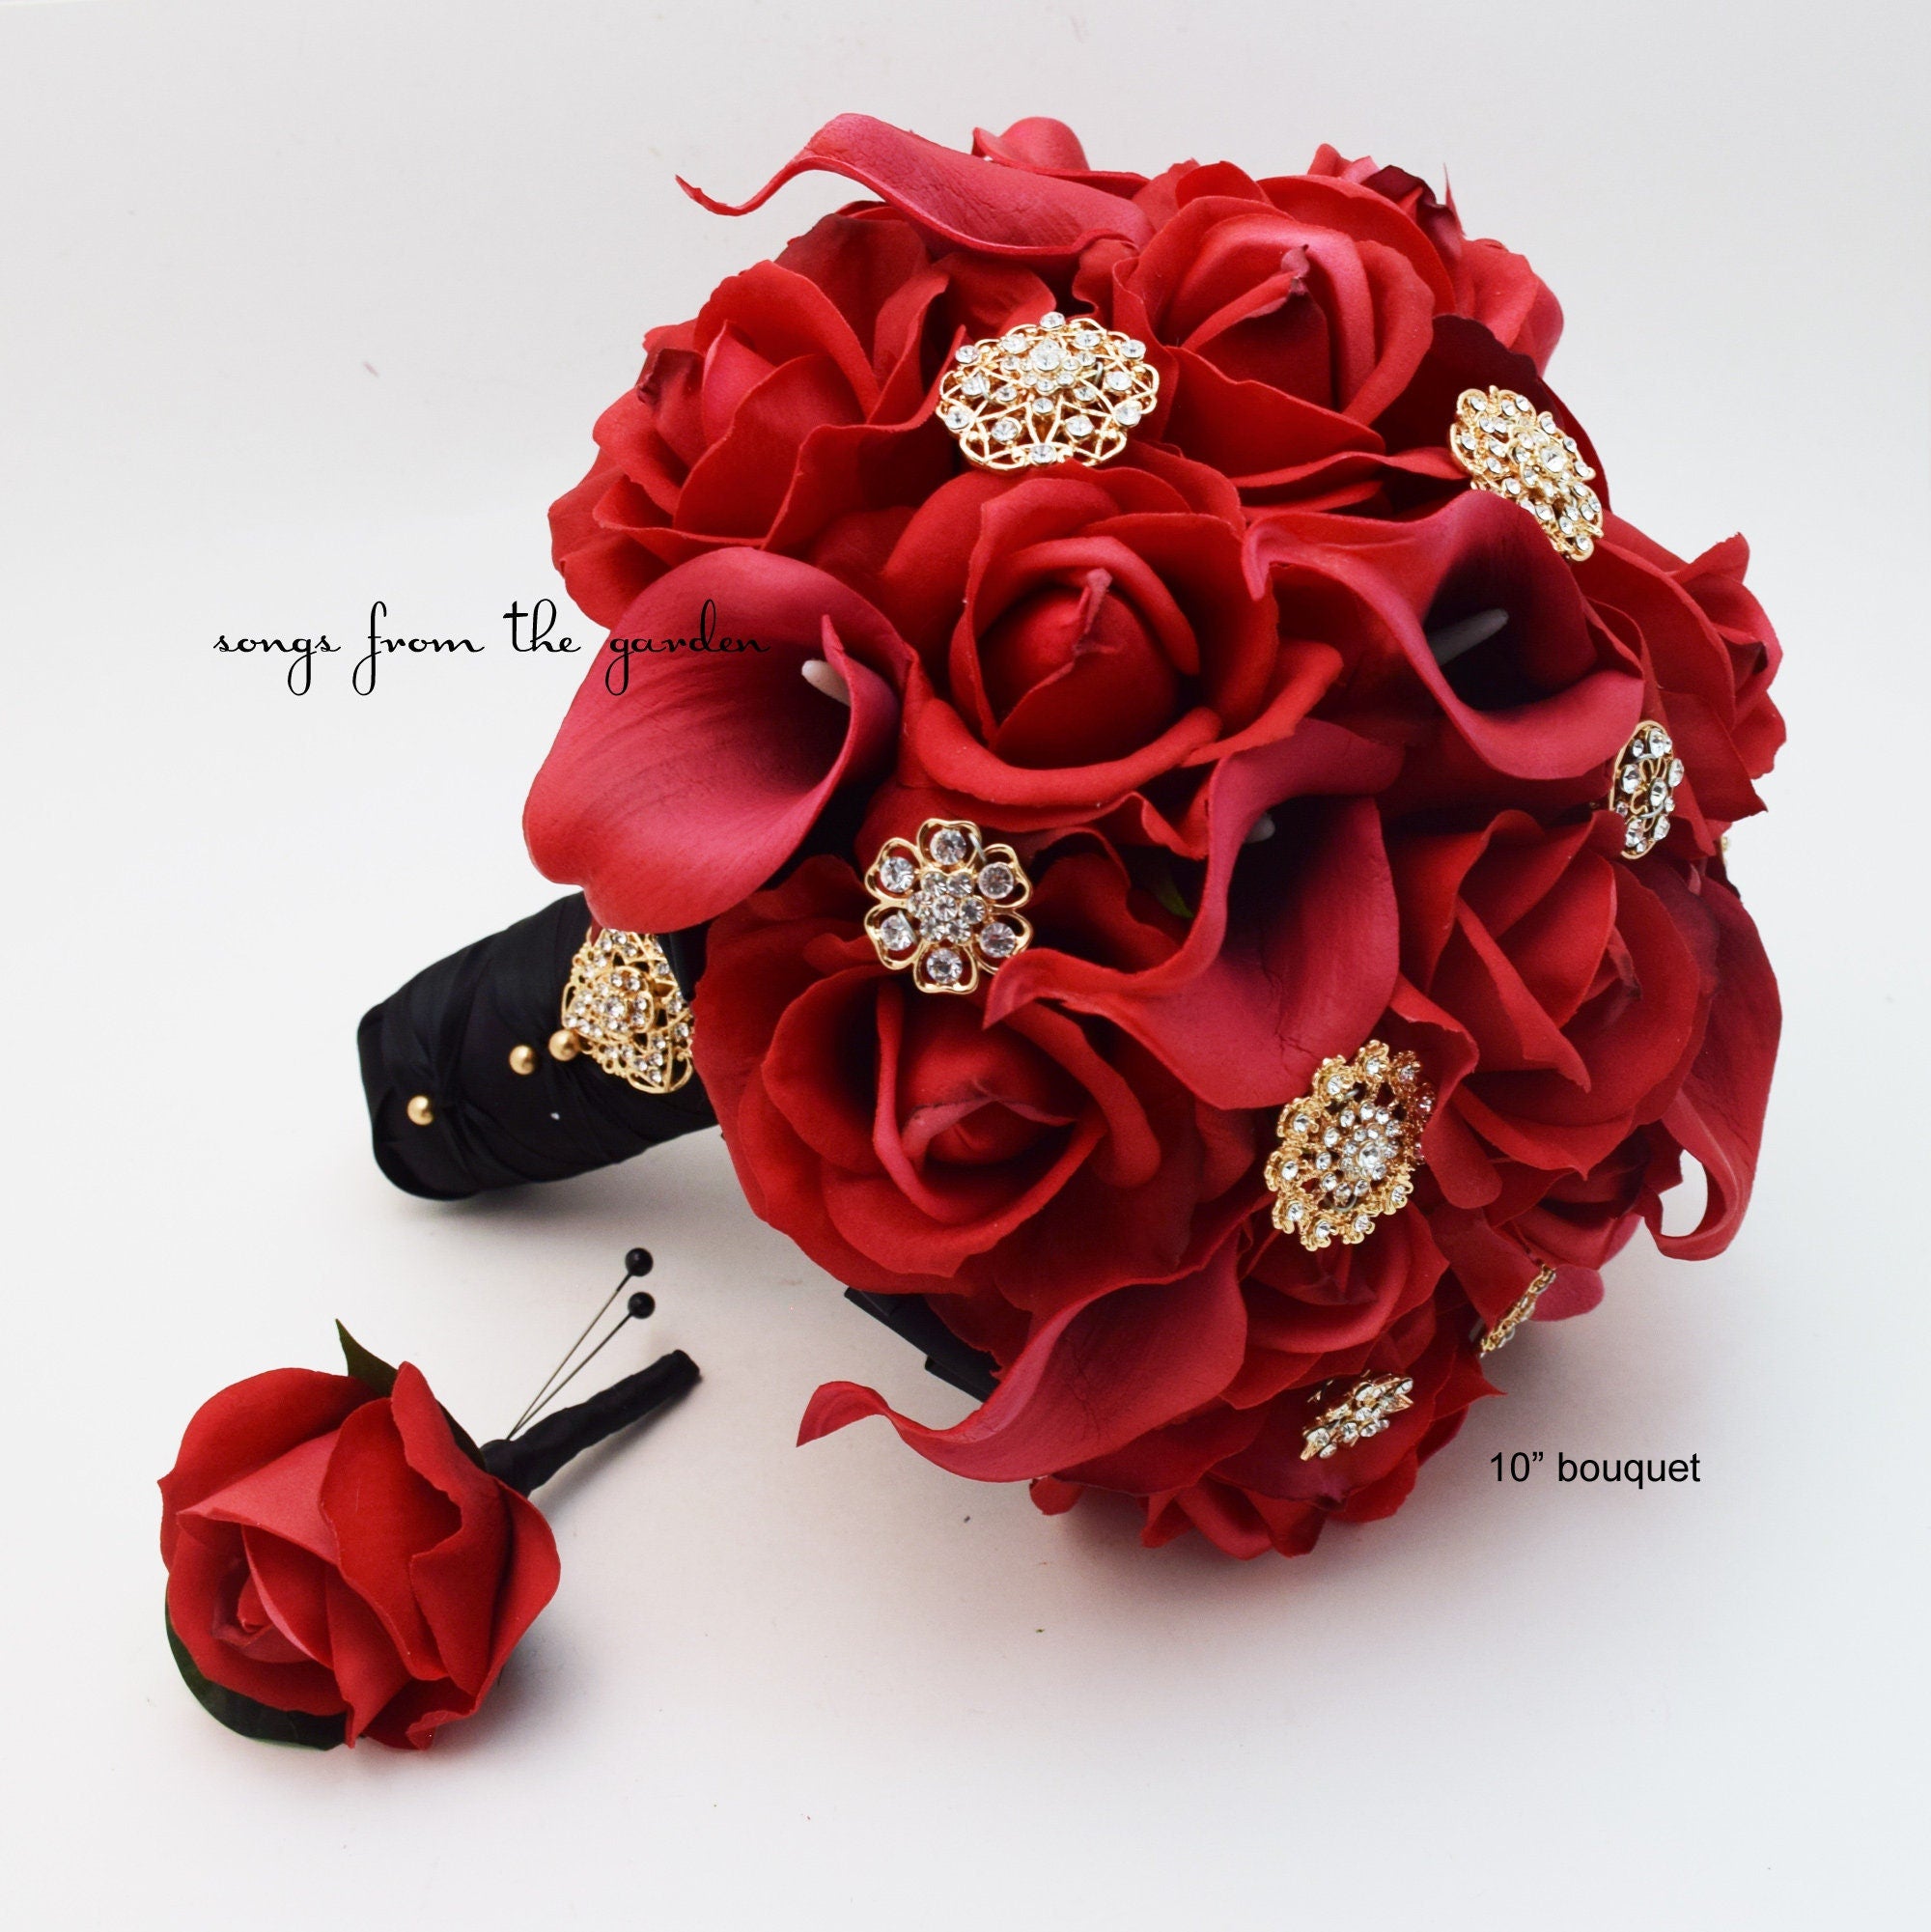 Red Roses Gold Brooches Bridal or Bridesmaid Real Touch Rose Bouquet- add Groom Groomsman Boutonniere or Flower Crown Cake Flowers & More!